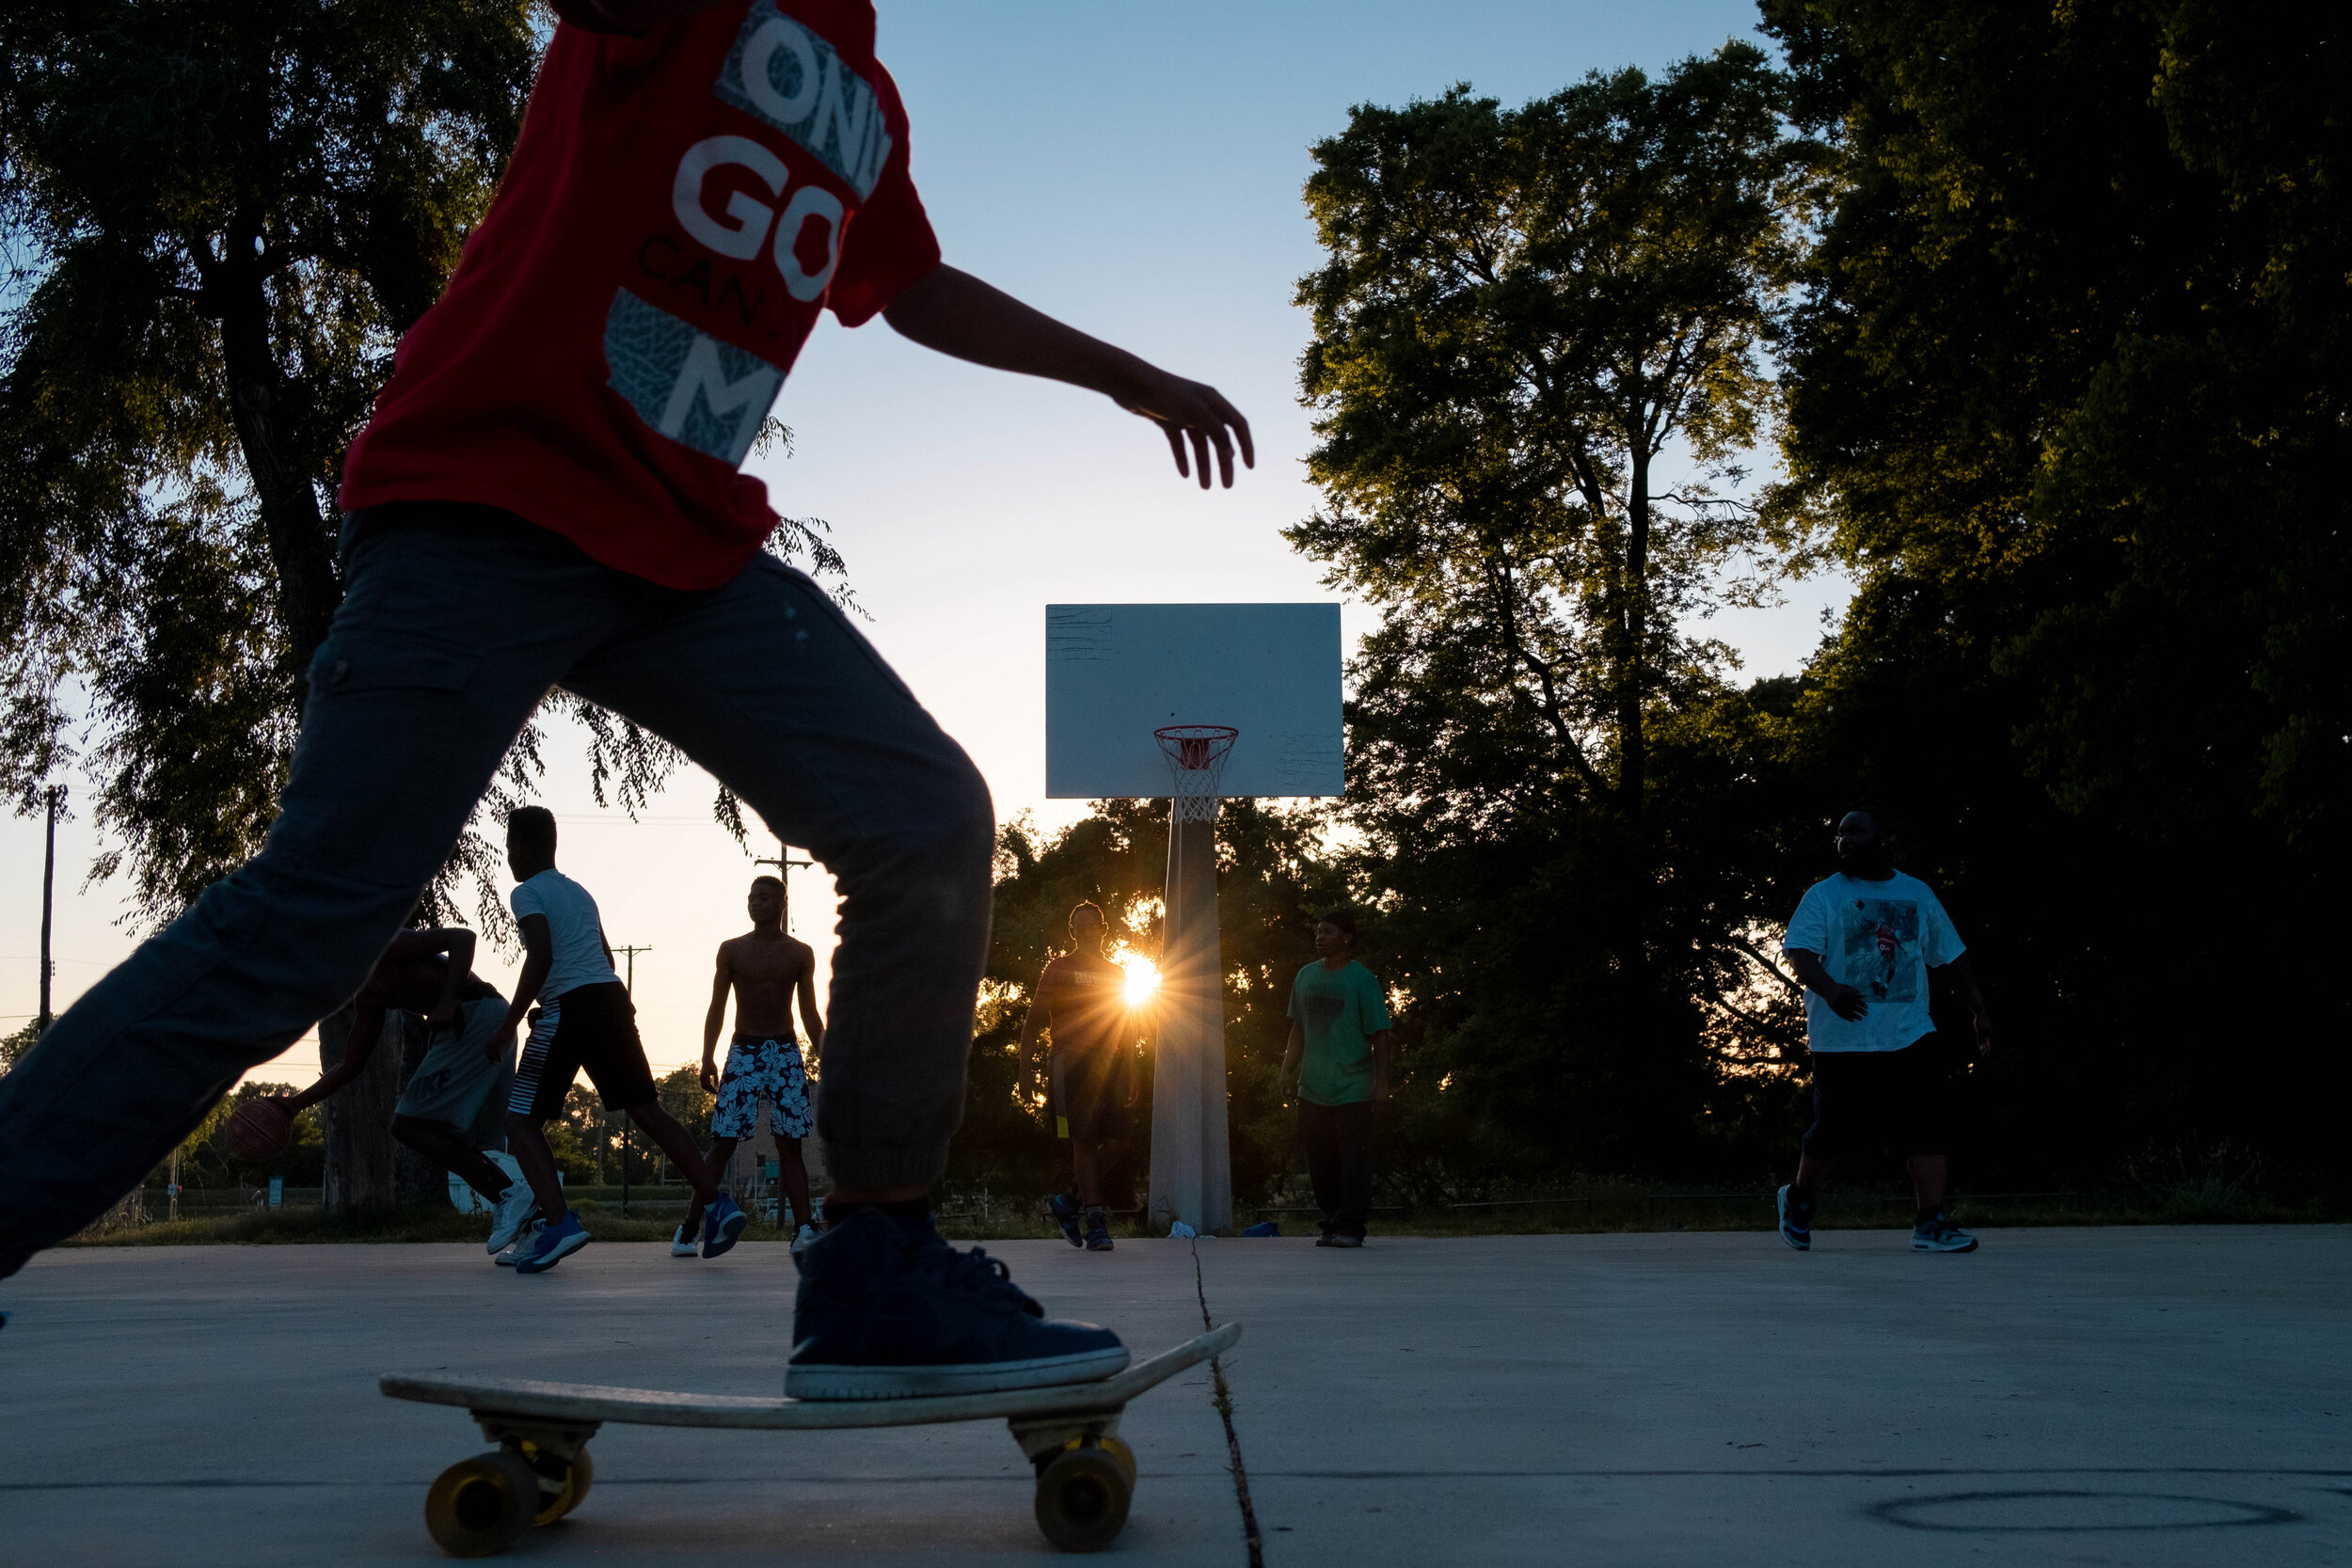  A boy rides by on a skateboard while young men play basketball in Booker T. Washington park.  